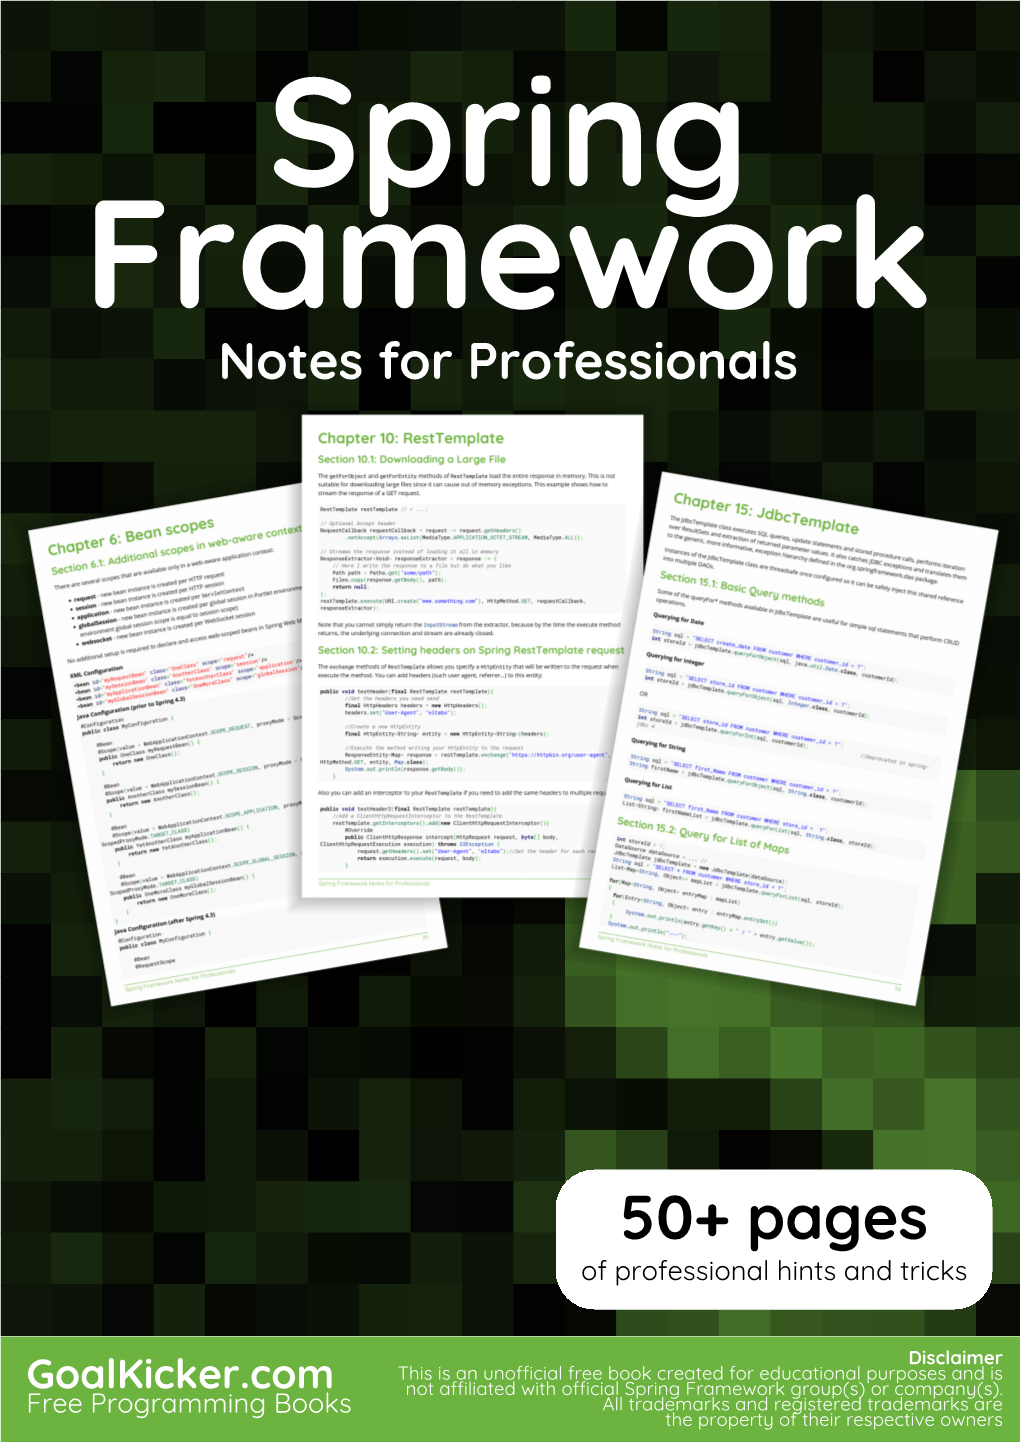 Spring Framework Notes for Professionals Book Is Compiled from Stack Overﬂow Documentation, the Content Is Written by the Beautiful People at Stack Overﬂow